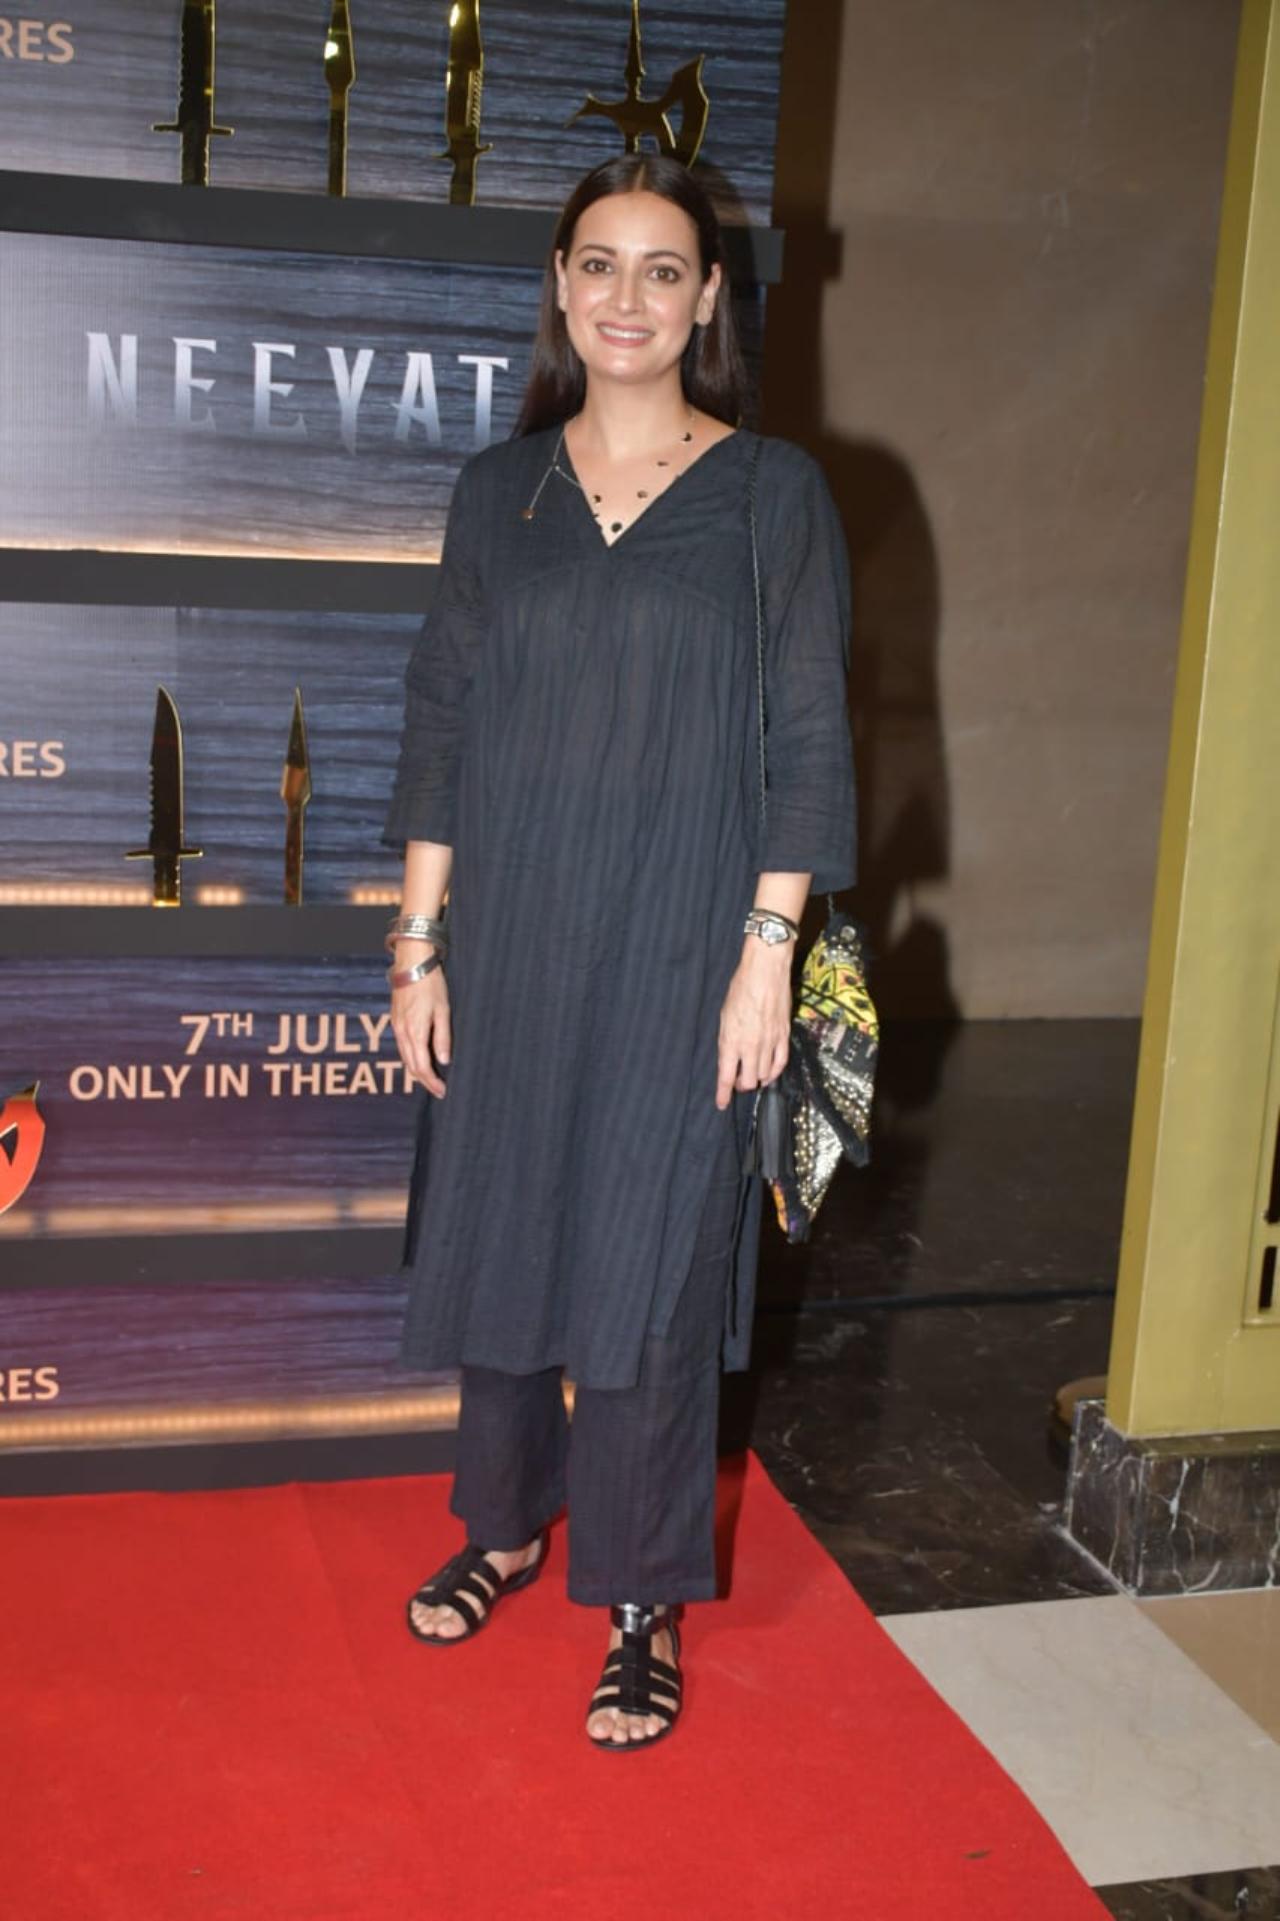 Dia Mirza went for an all-black simple look for the premiere night